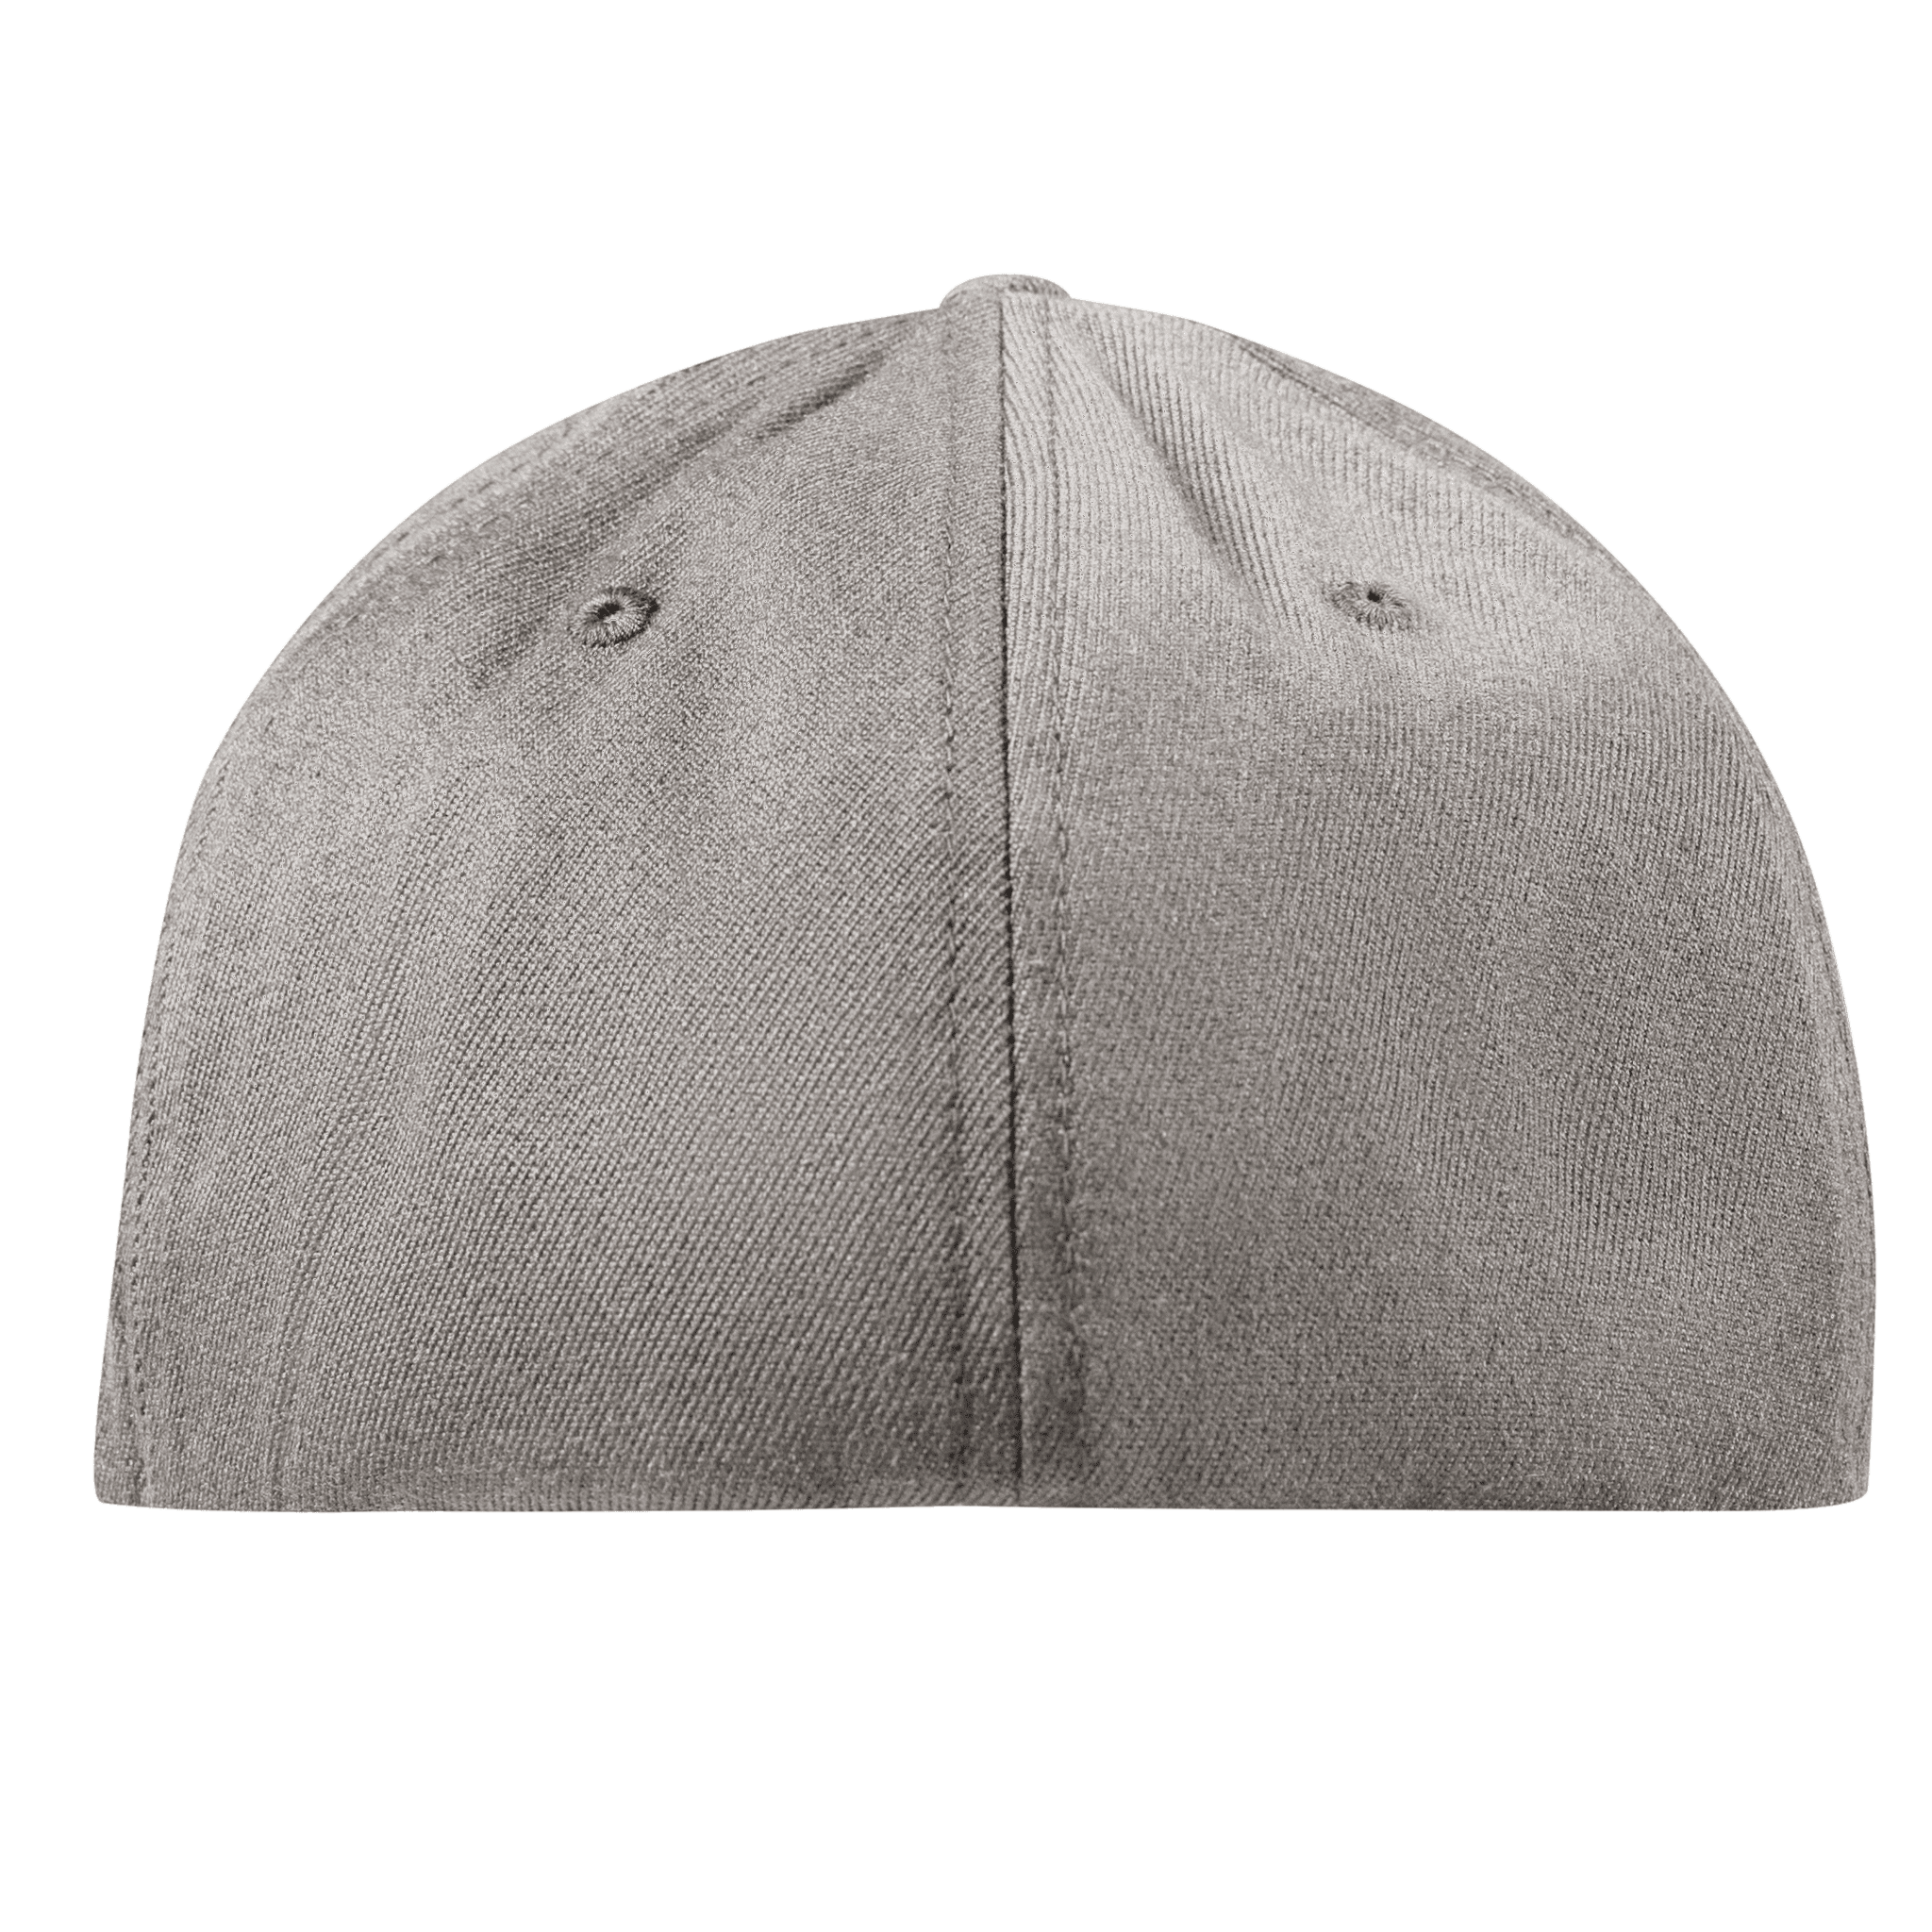 California Compass Flexfit Fitted Back Heather Grey